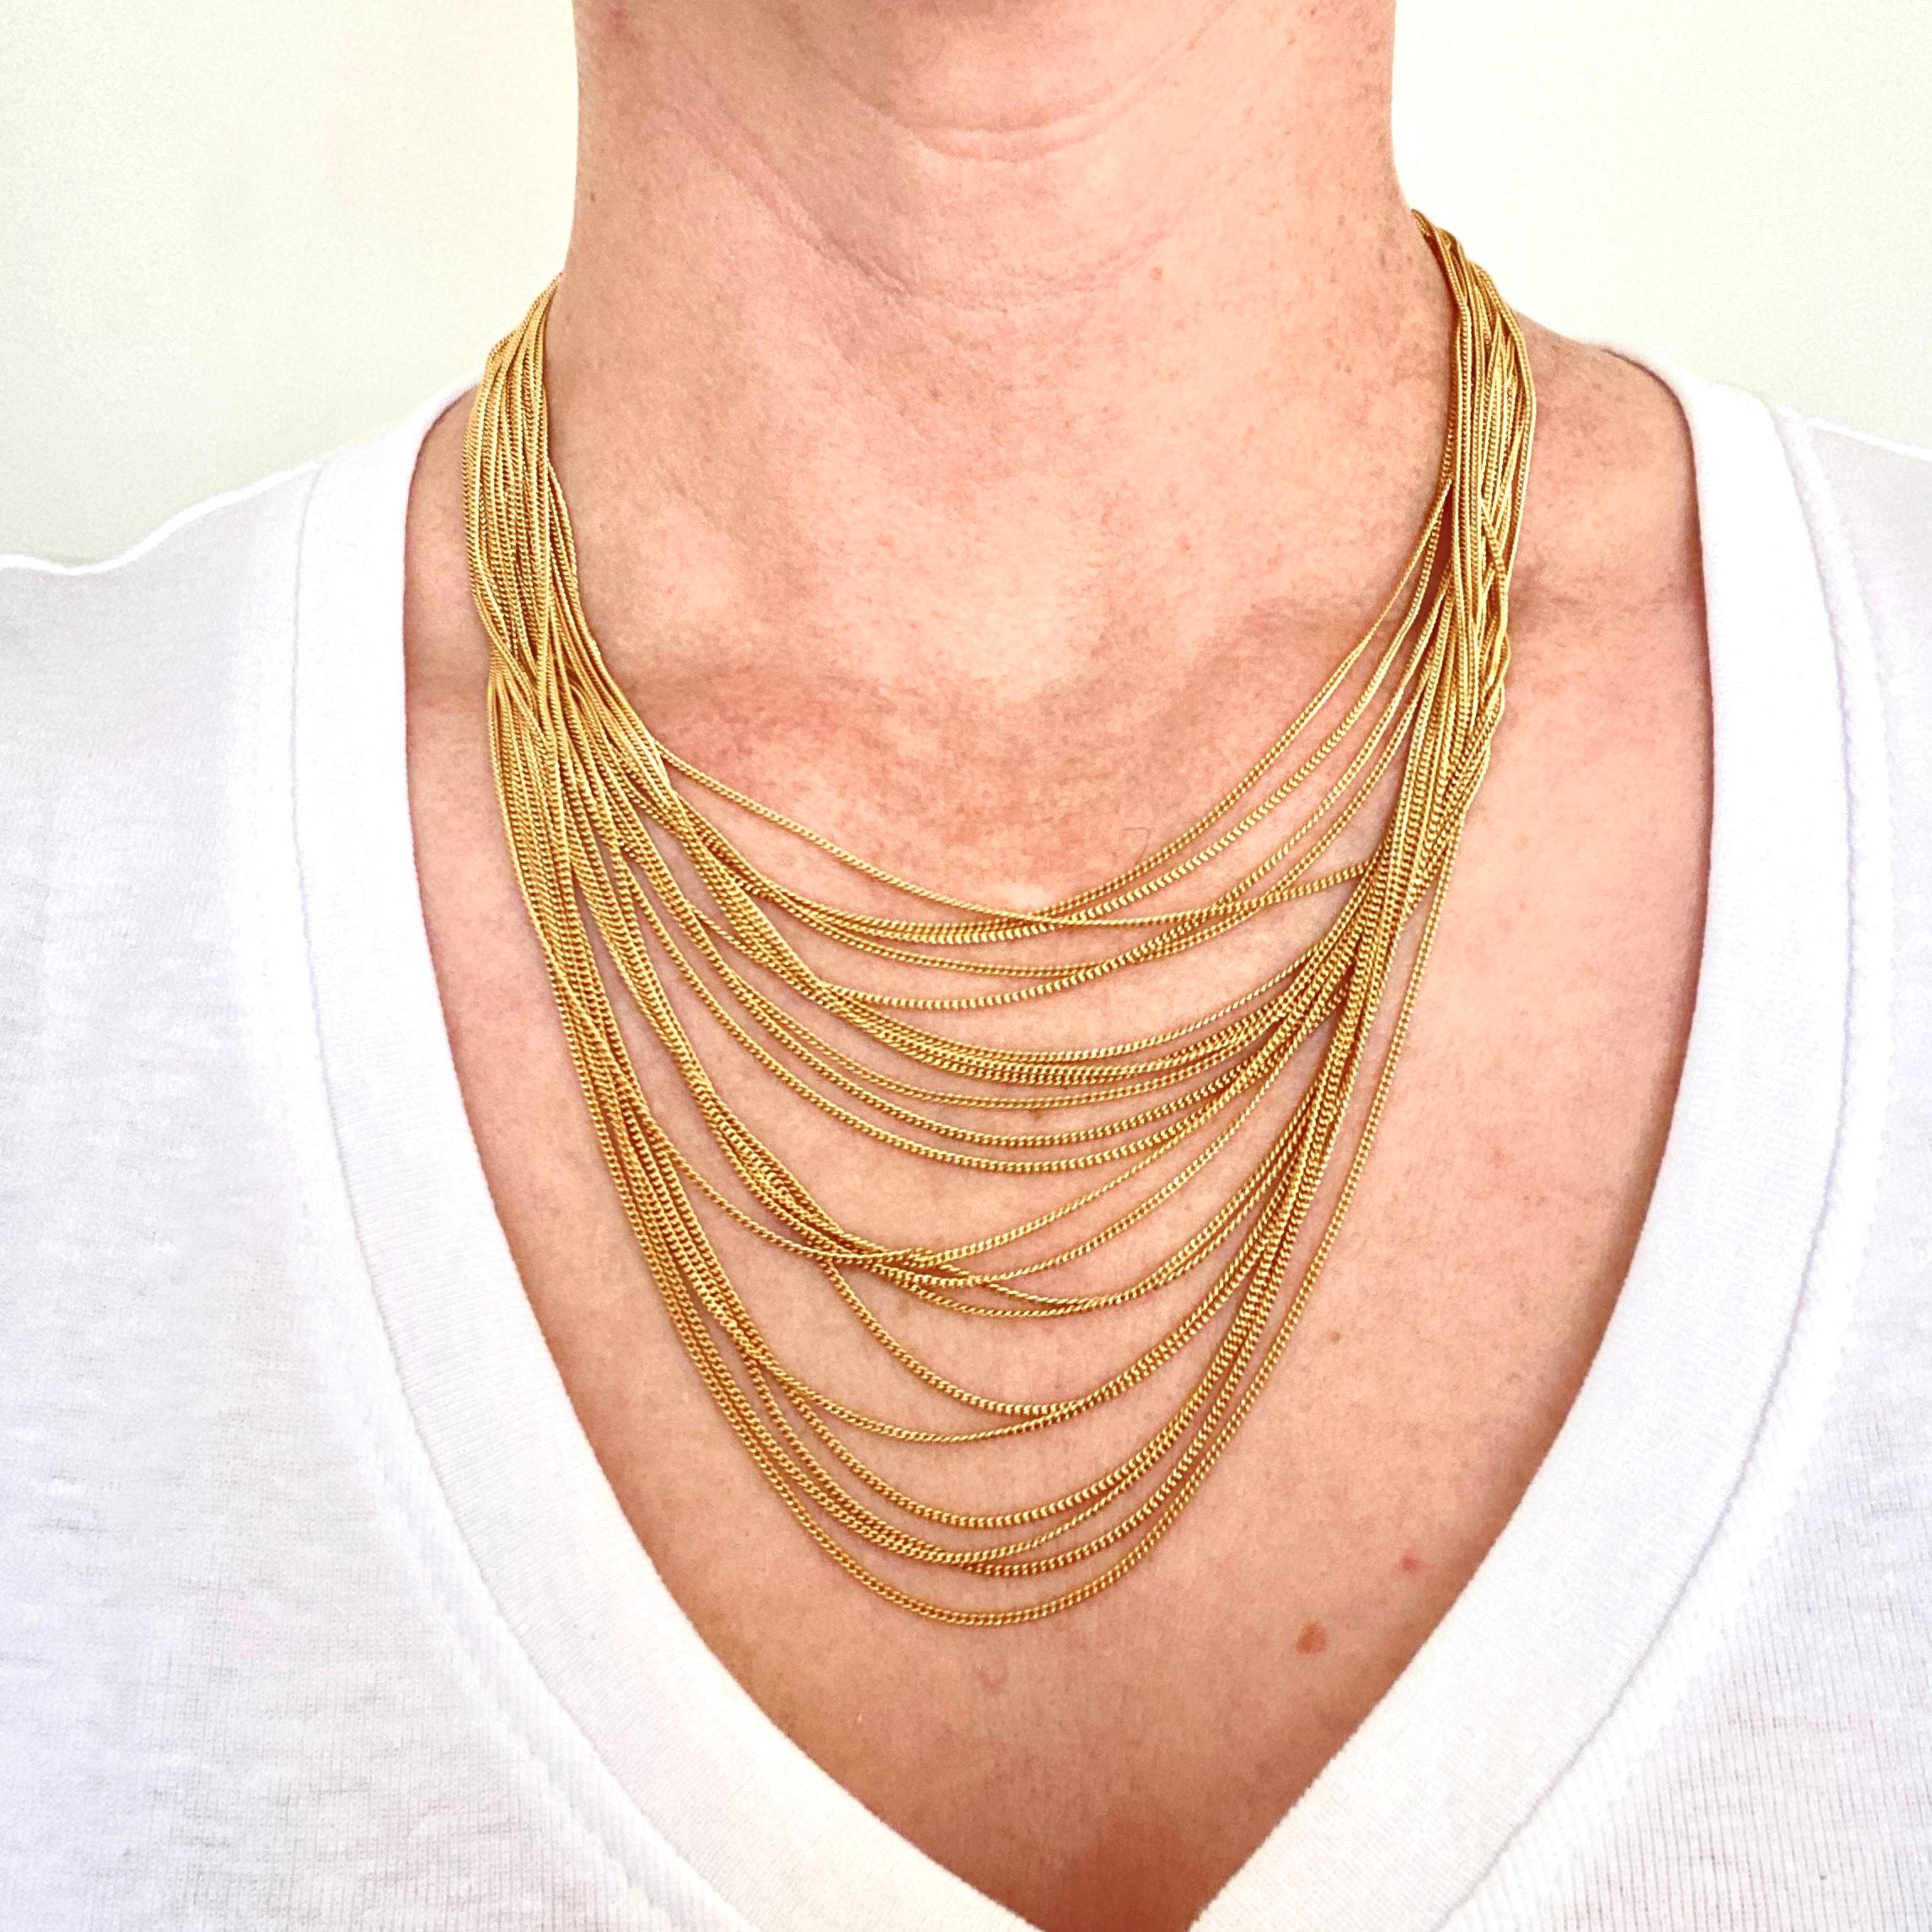 childs necklace length